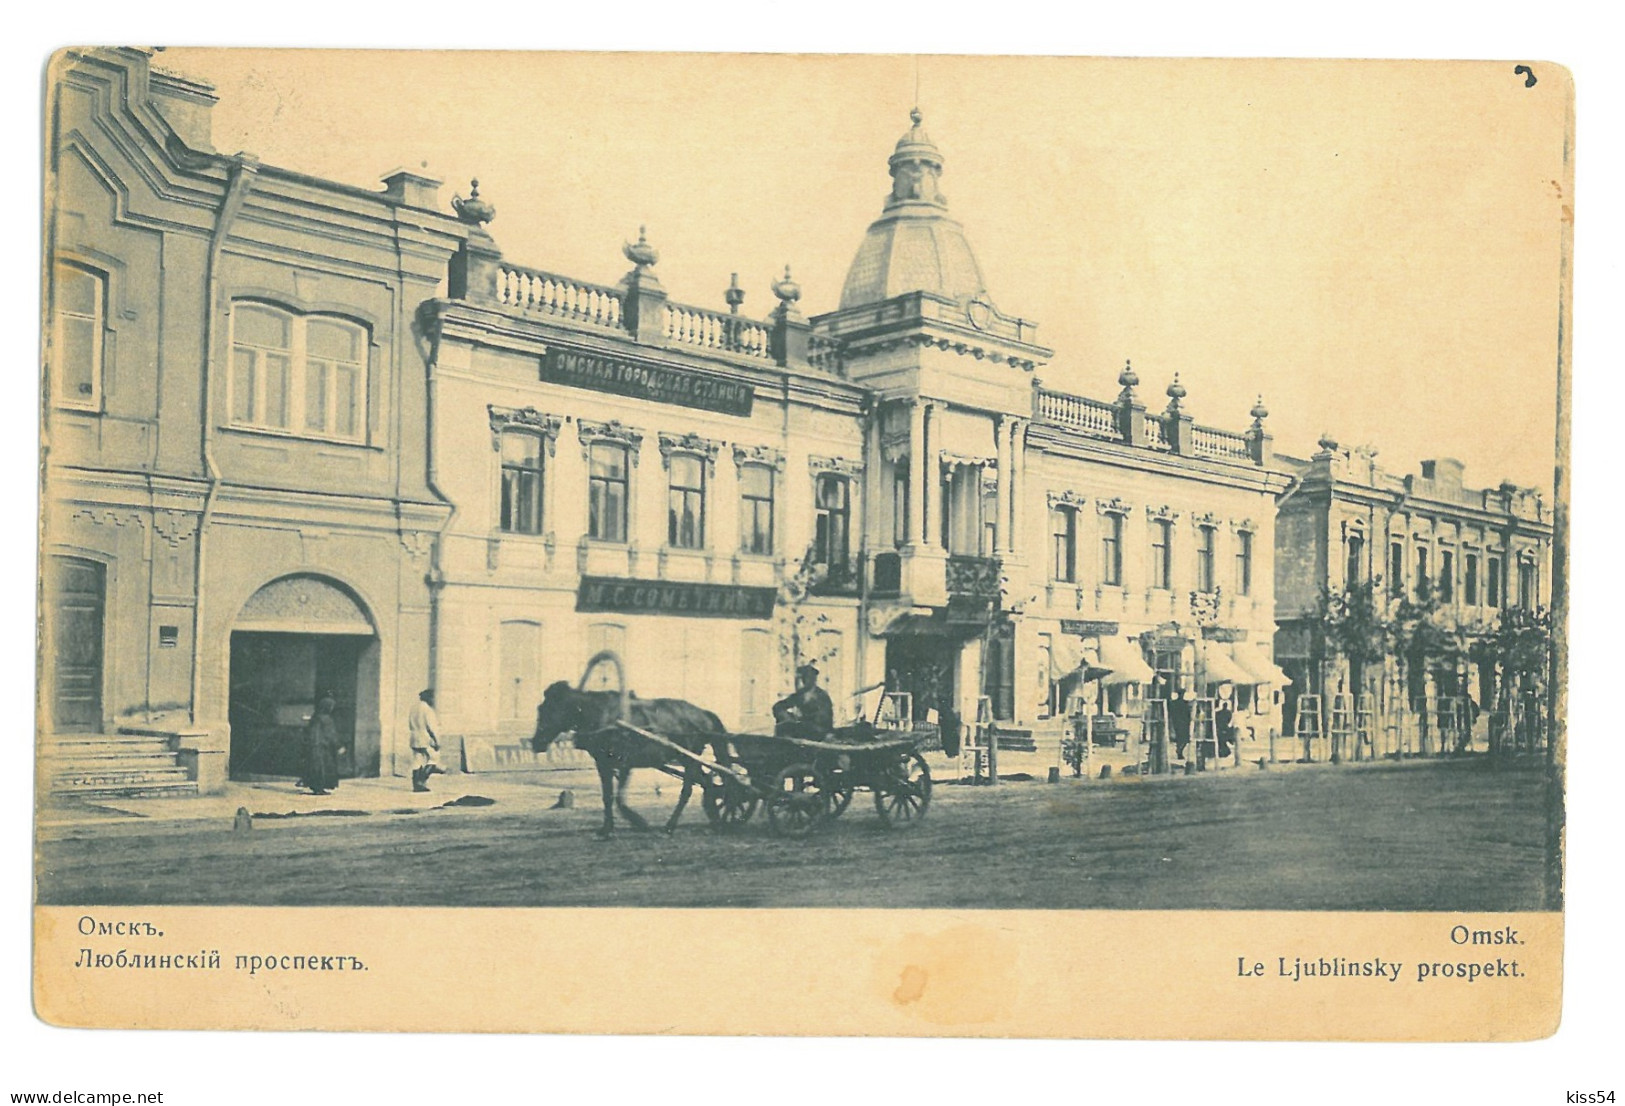 RUS 00 - 17924 OMSK, Railway Station, Russia - Old Postcard - Used - 1911 - Russie